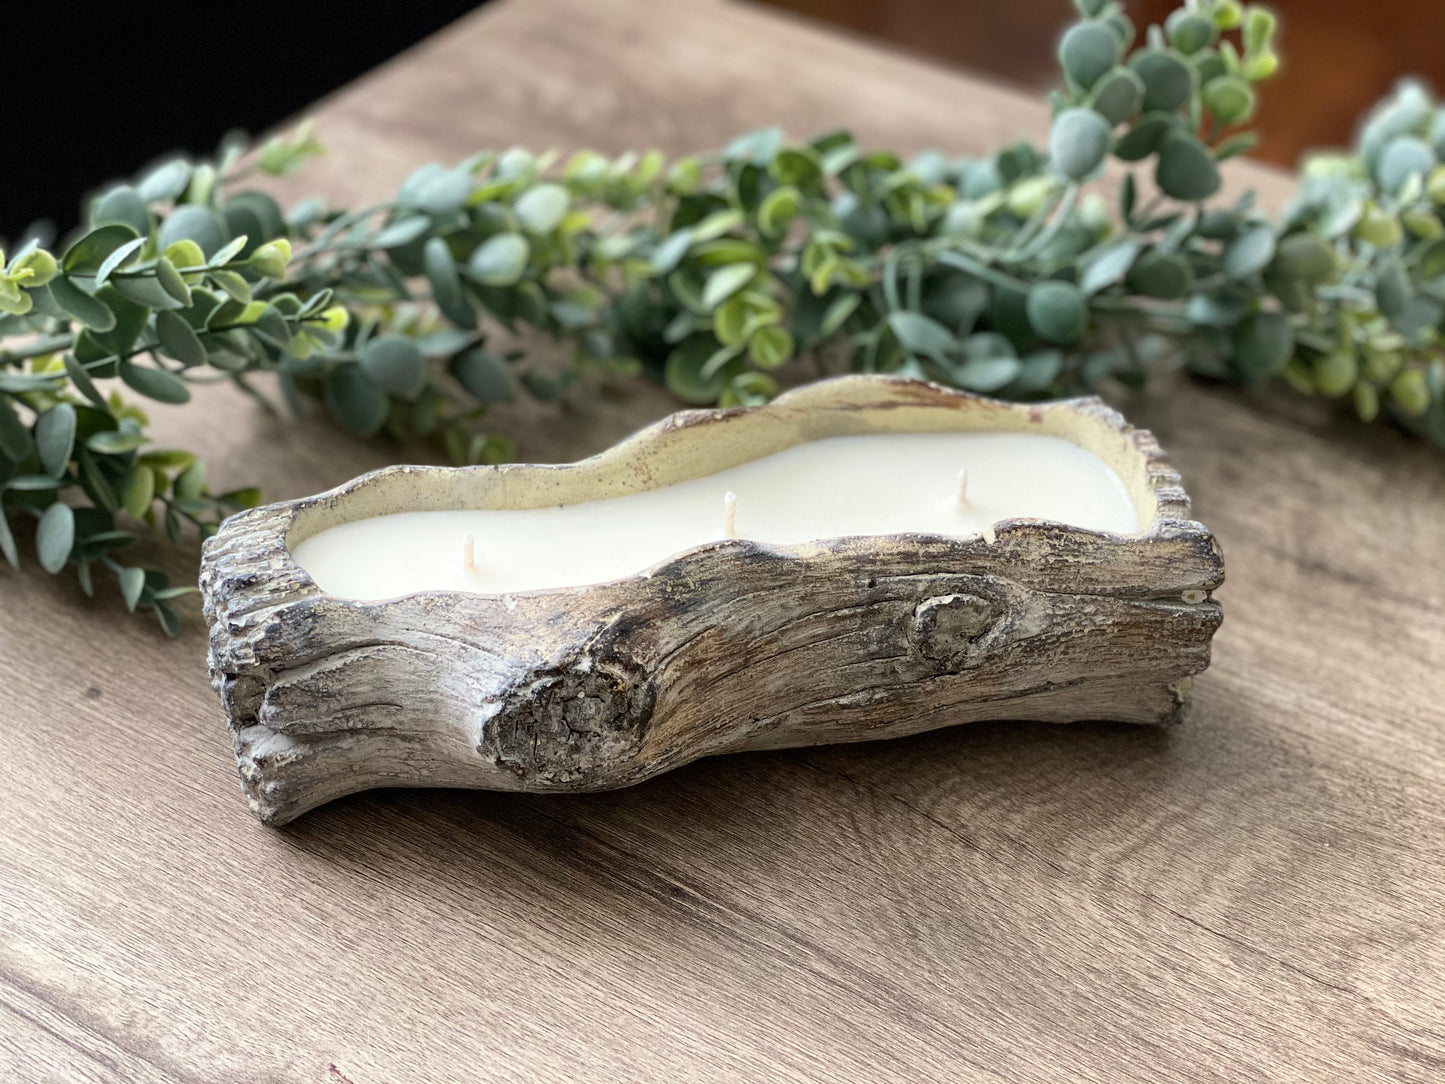 Cement Tree Log Decor Candle | Sea Salt & Orchids | 12 oz. sea salt, lily of the valley, wood. A unique piece of home decor that works perfectly for indoor and outdoor space. When you finished the candle, this cement log can be used as planter, serving dish and decorative holder. Bluffton Candles - The Bluffton Shop - Gift Shops